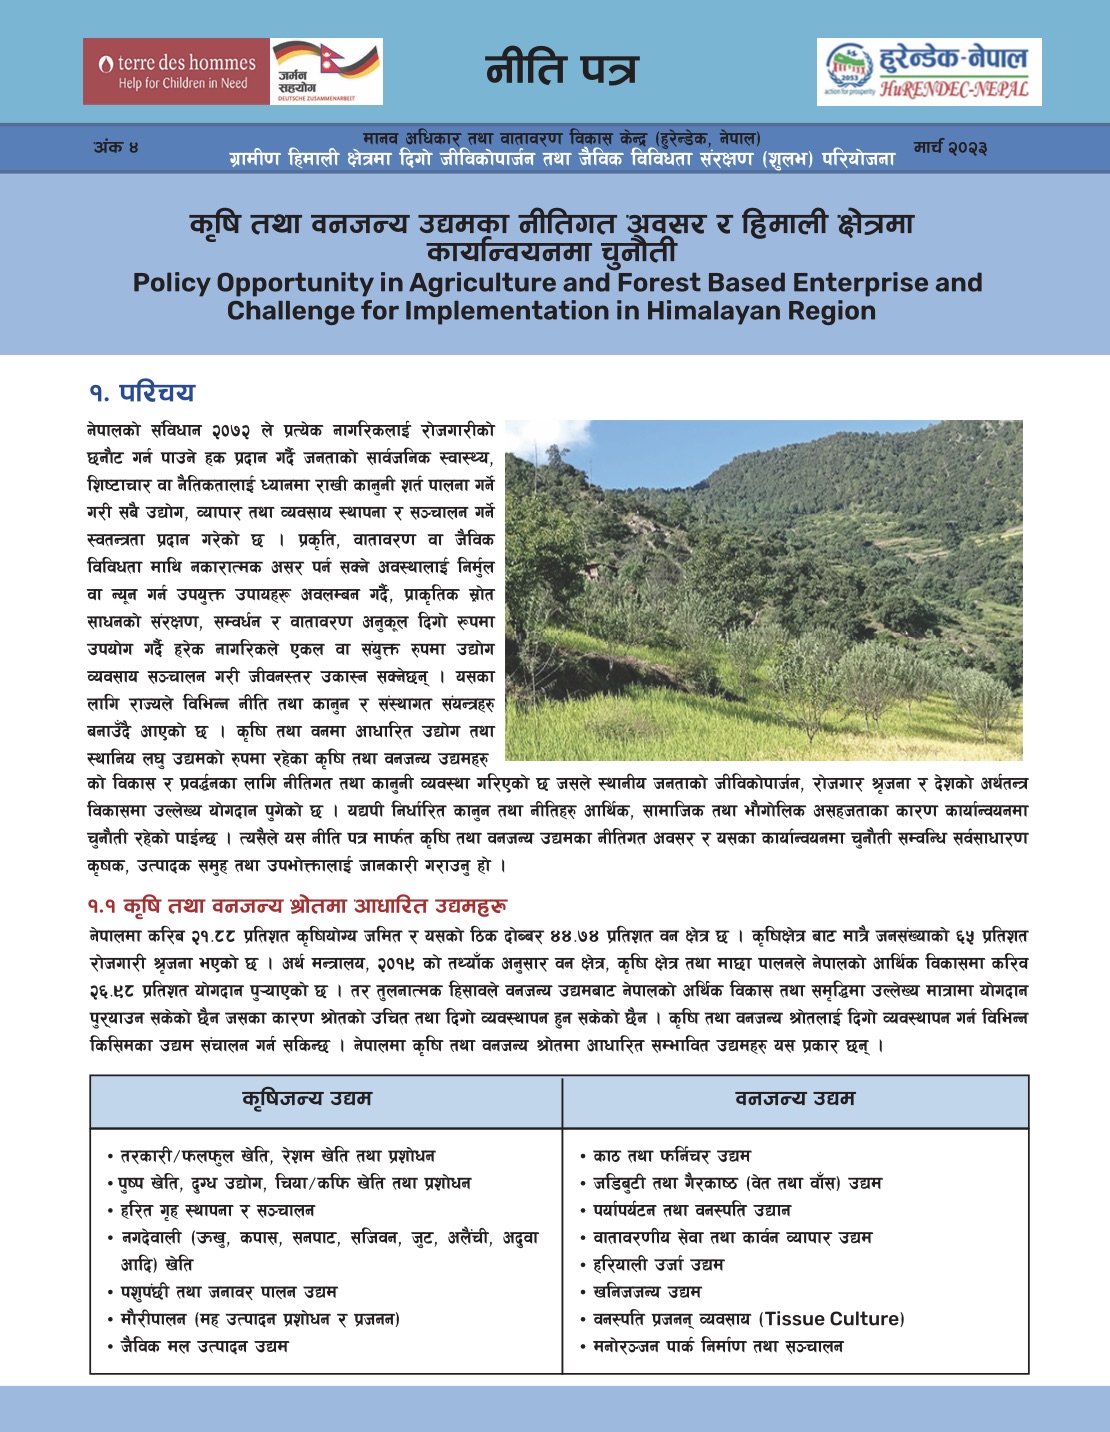 Policy Opportunities in Agriculture and Forest Based Enterprise and Challenge for Implementation in Himalayan Region